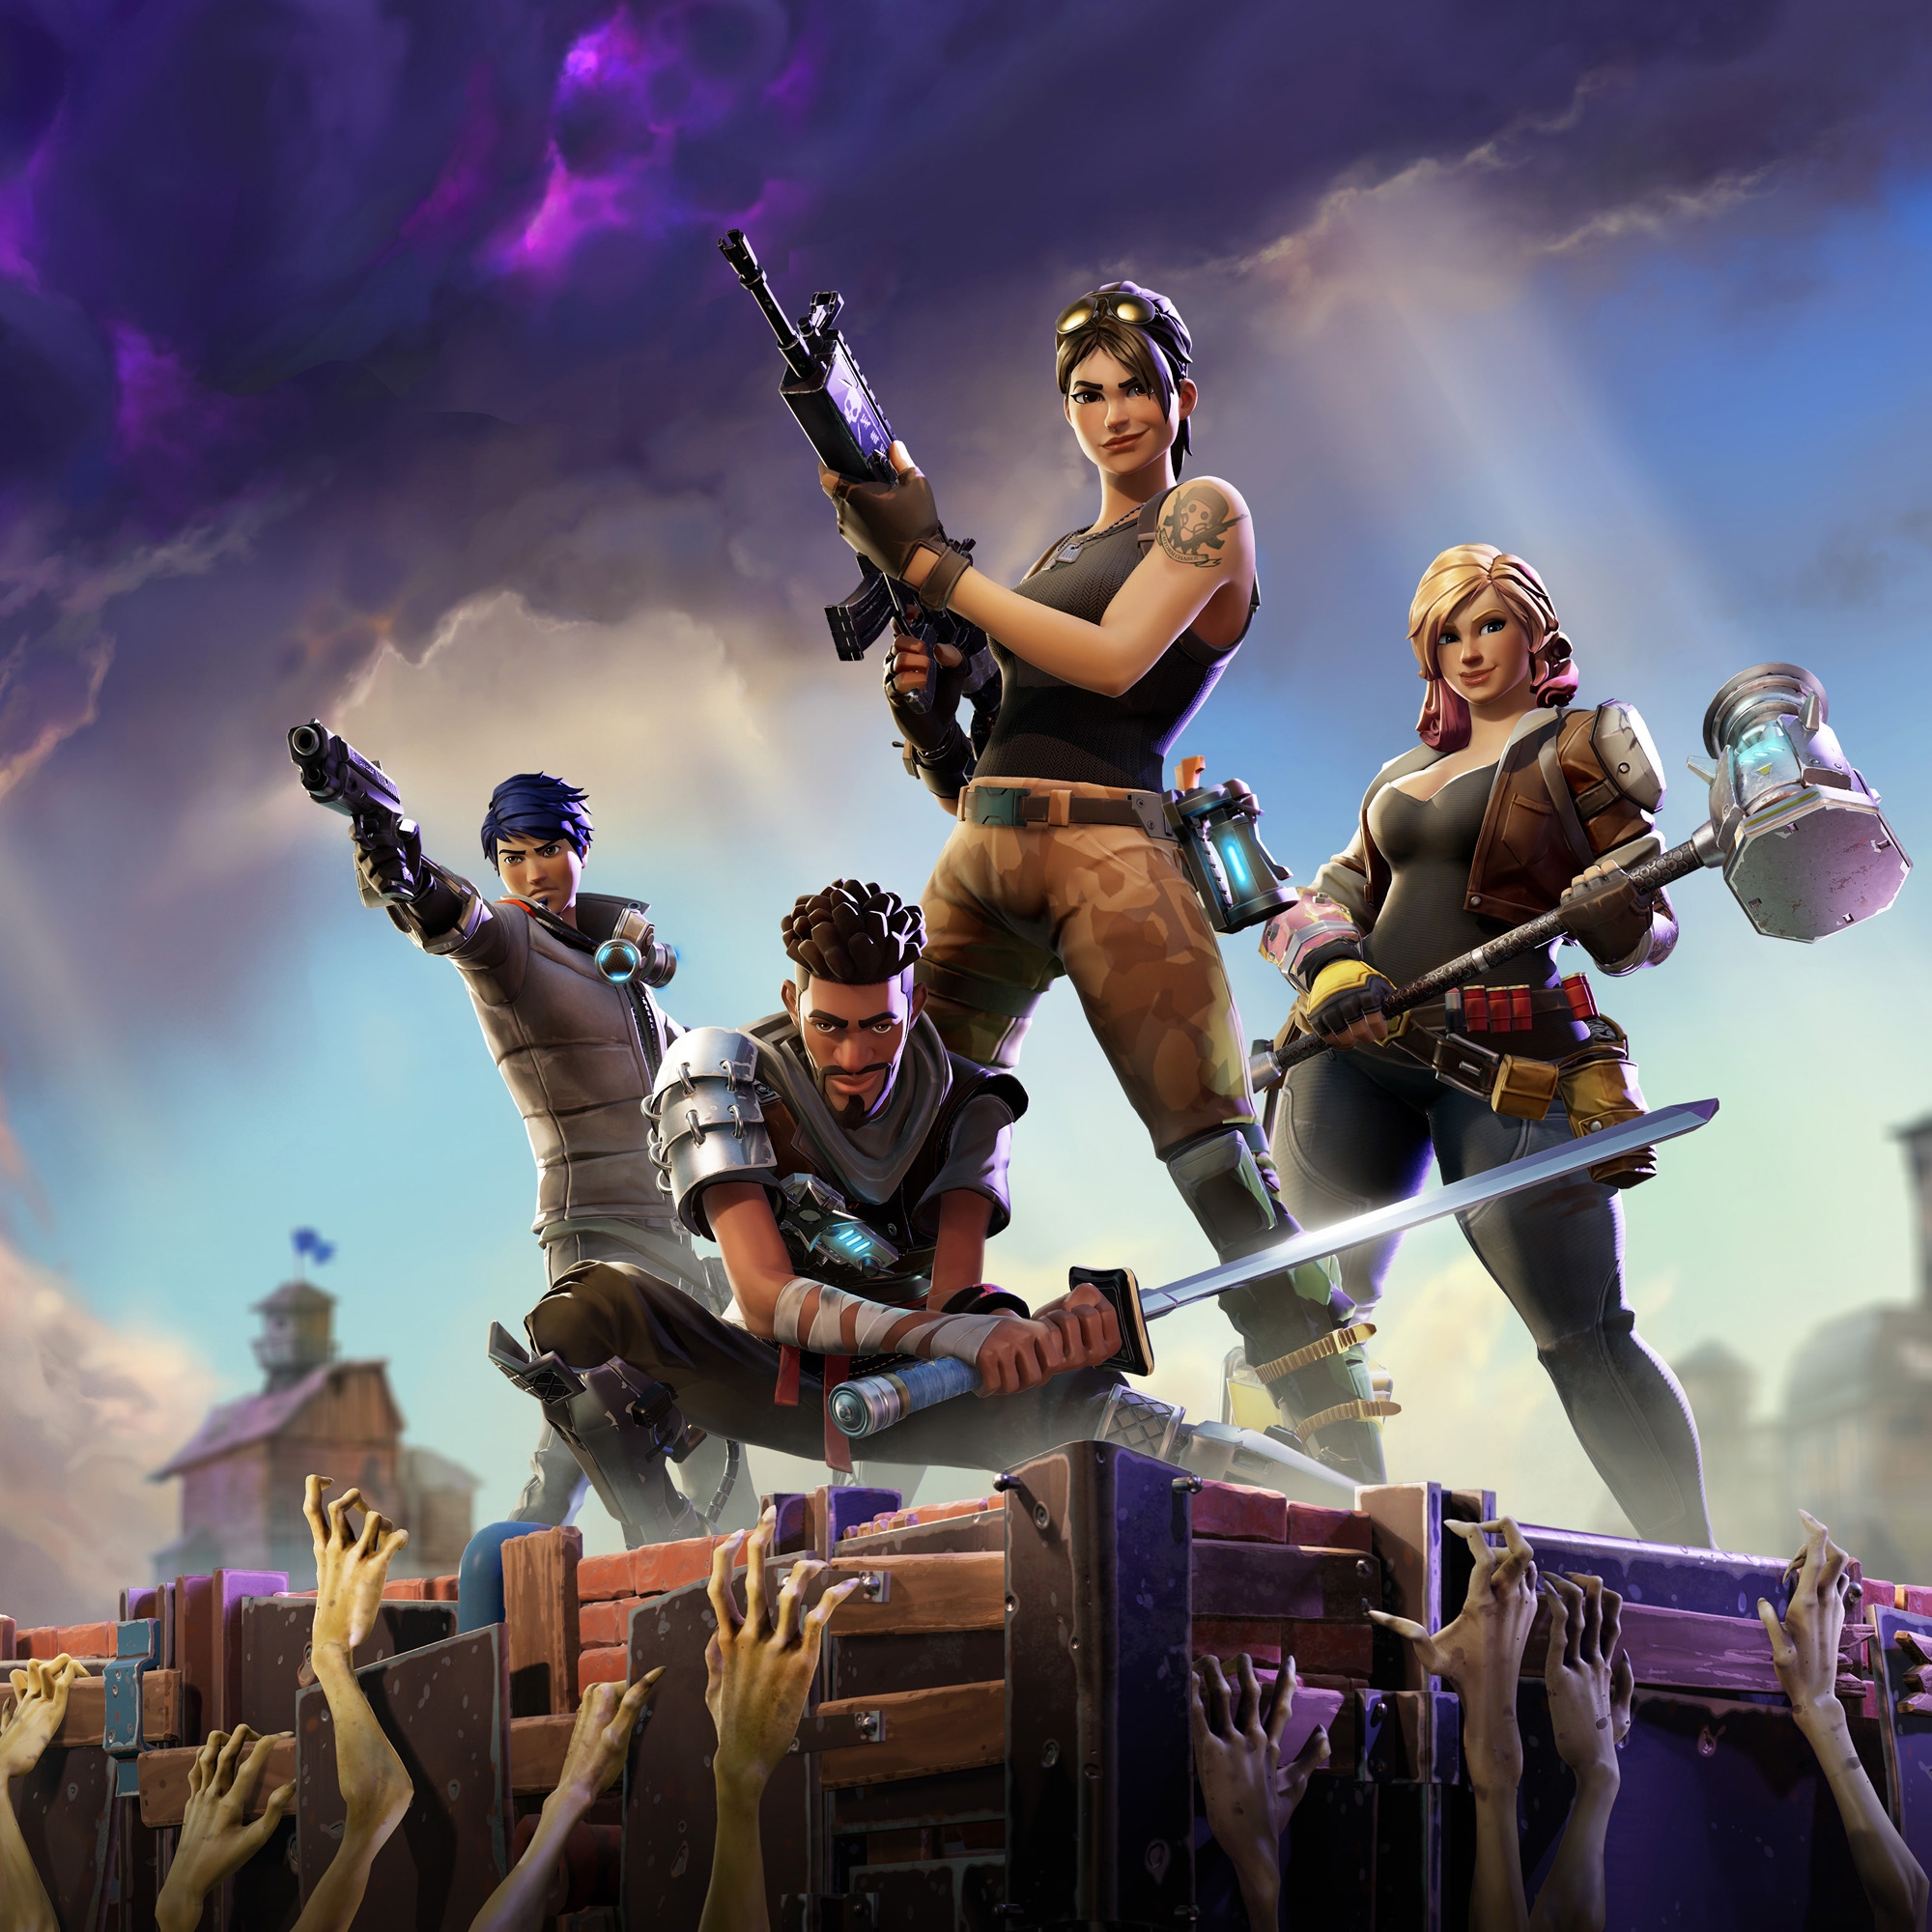 2048x1152 Fortnite 2048x1152 Resolution HD 4k Wallpapers Images